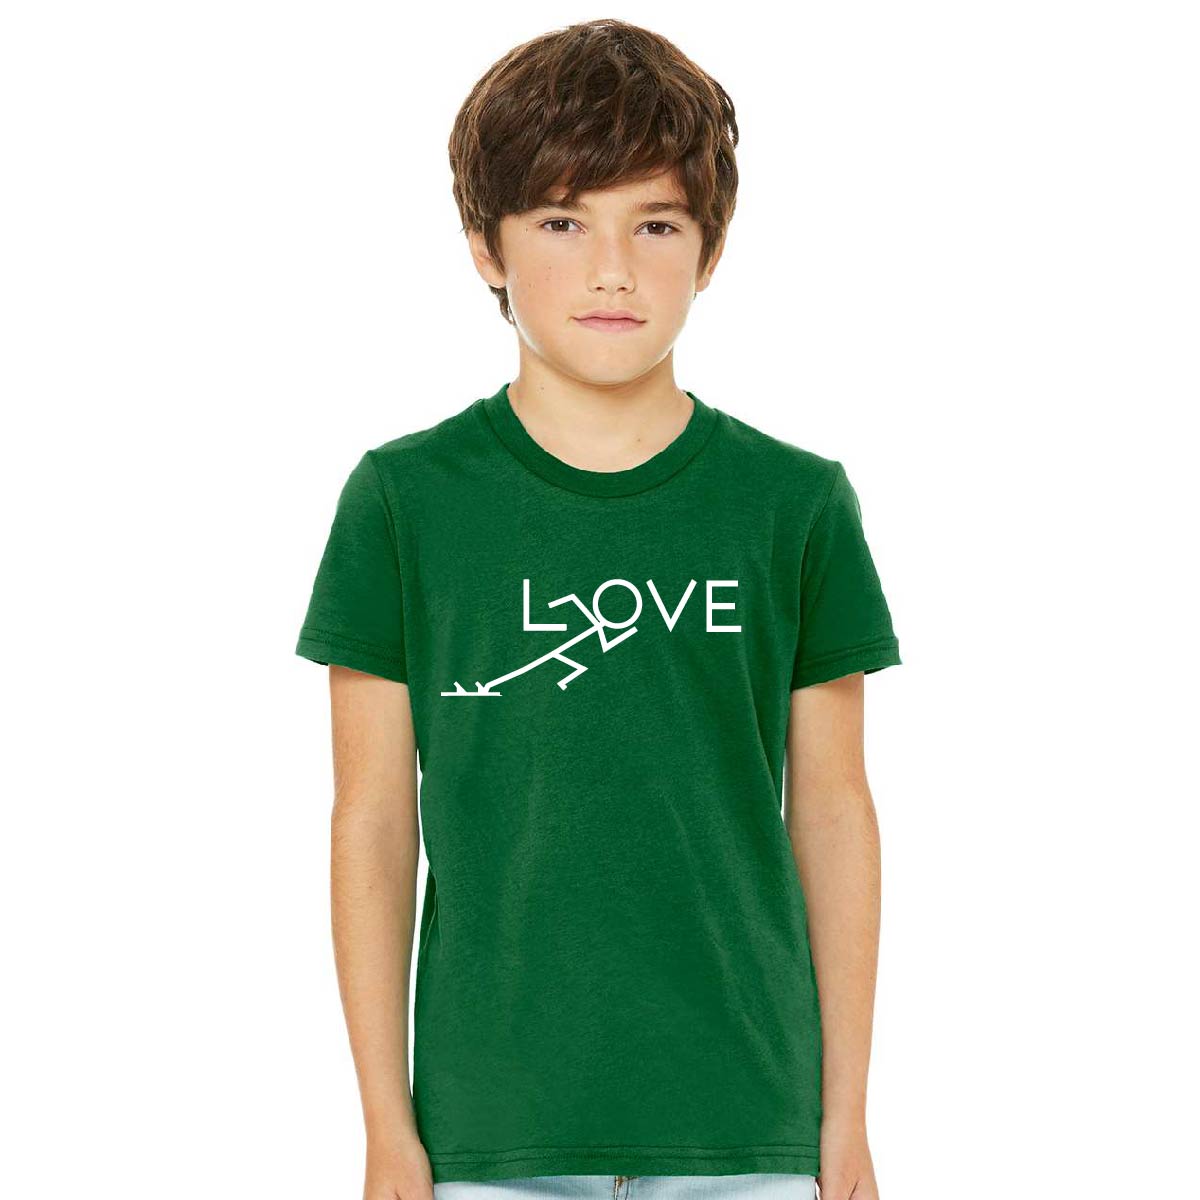 Sprinting Youth T-shirt